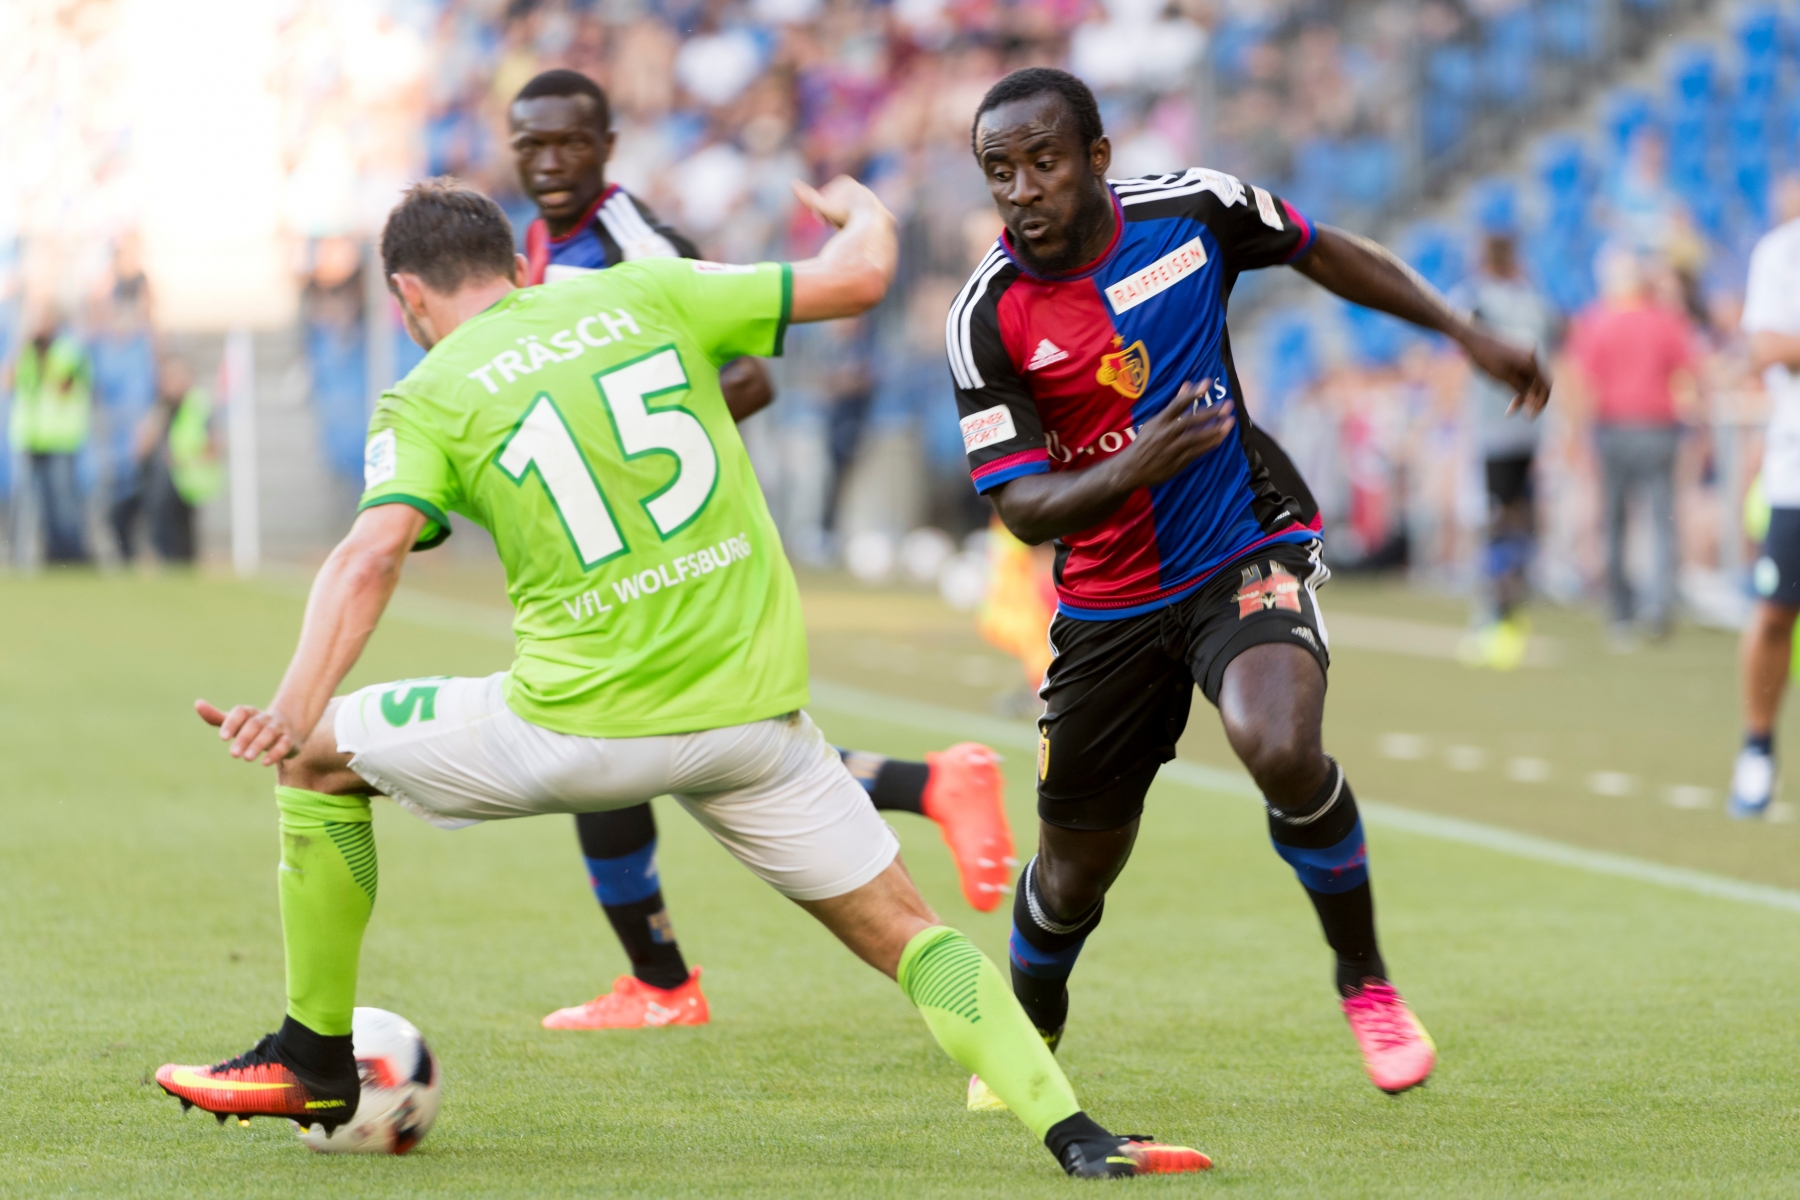 Wolfsburg's Christian Traesch, left, fights for the ball against Basel's Seydou Doumbia, right, during a friendly soccer match between Switzerland's FC Basel 1893 and Germany's VfL Wolfsburg at the St. Jakob-Park stadium in Basel, Switzerland, on Tuesday, July 19, 2016. (KEYSTONE/Georgios Kefalas)d SOCCER BASEL WOLFSBURG